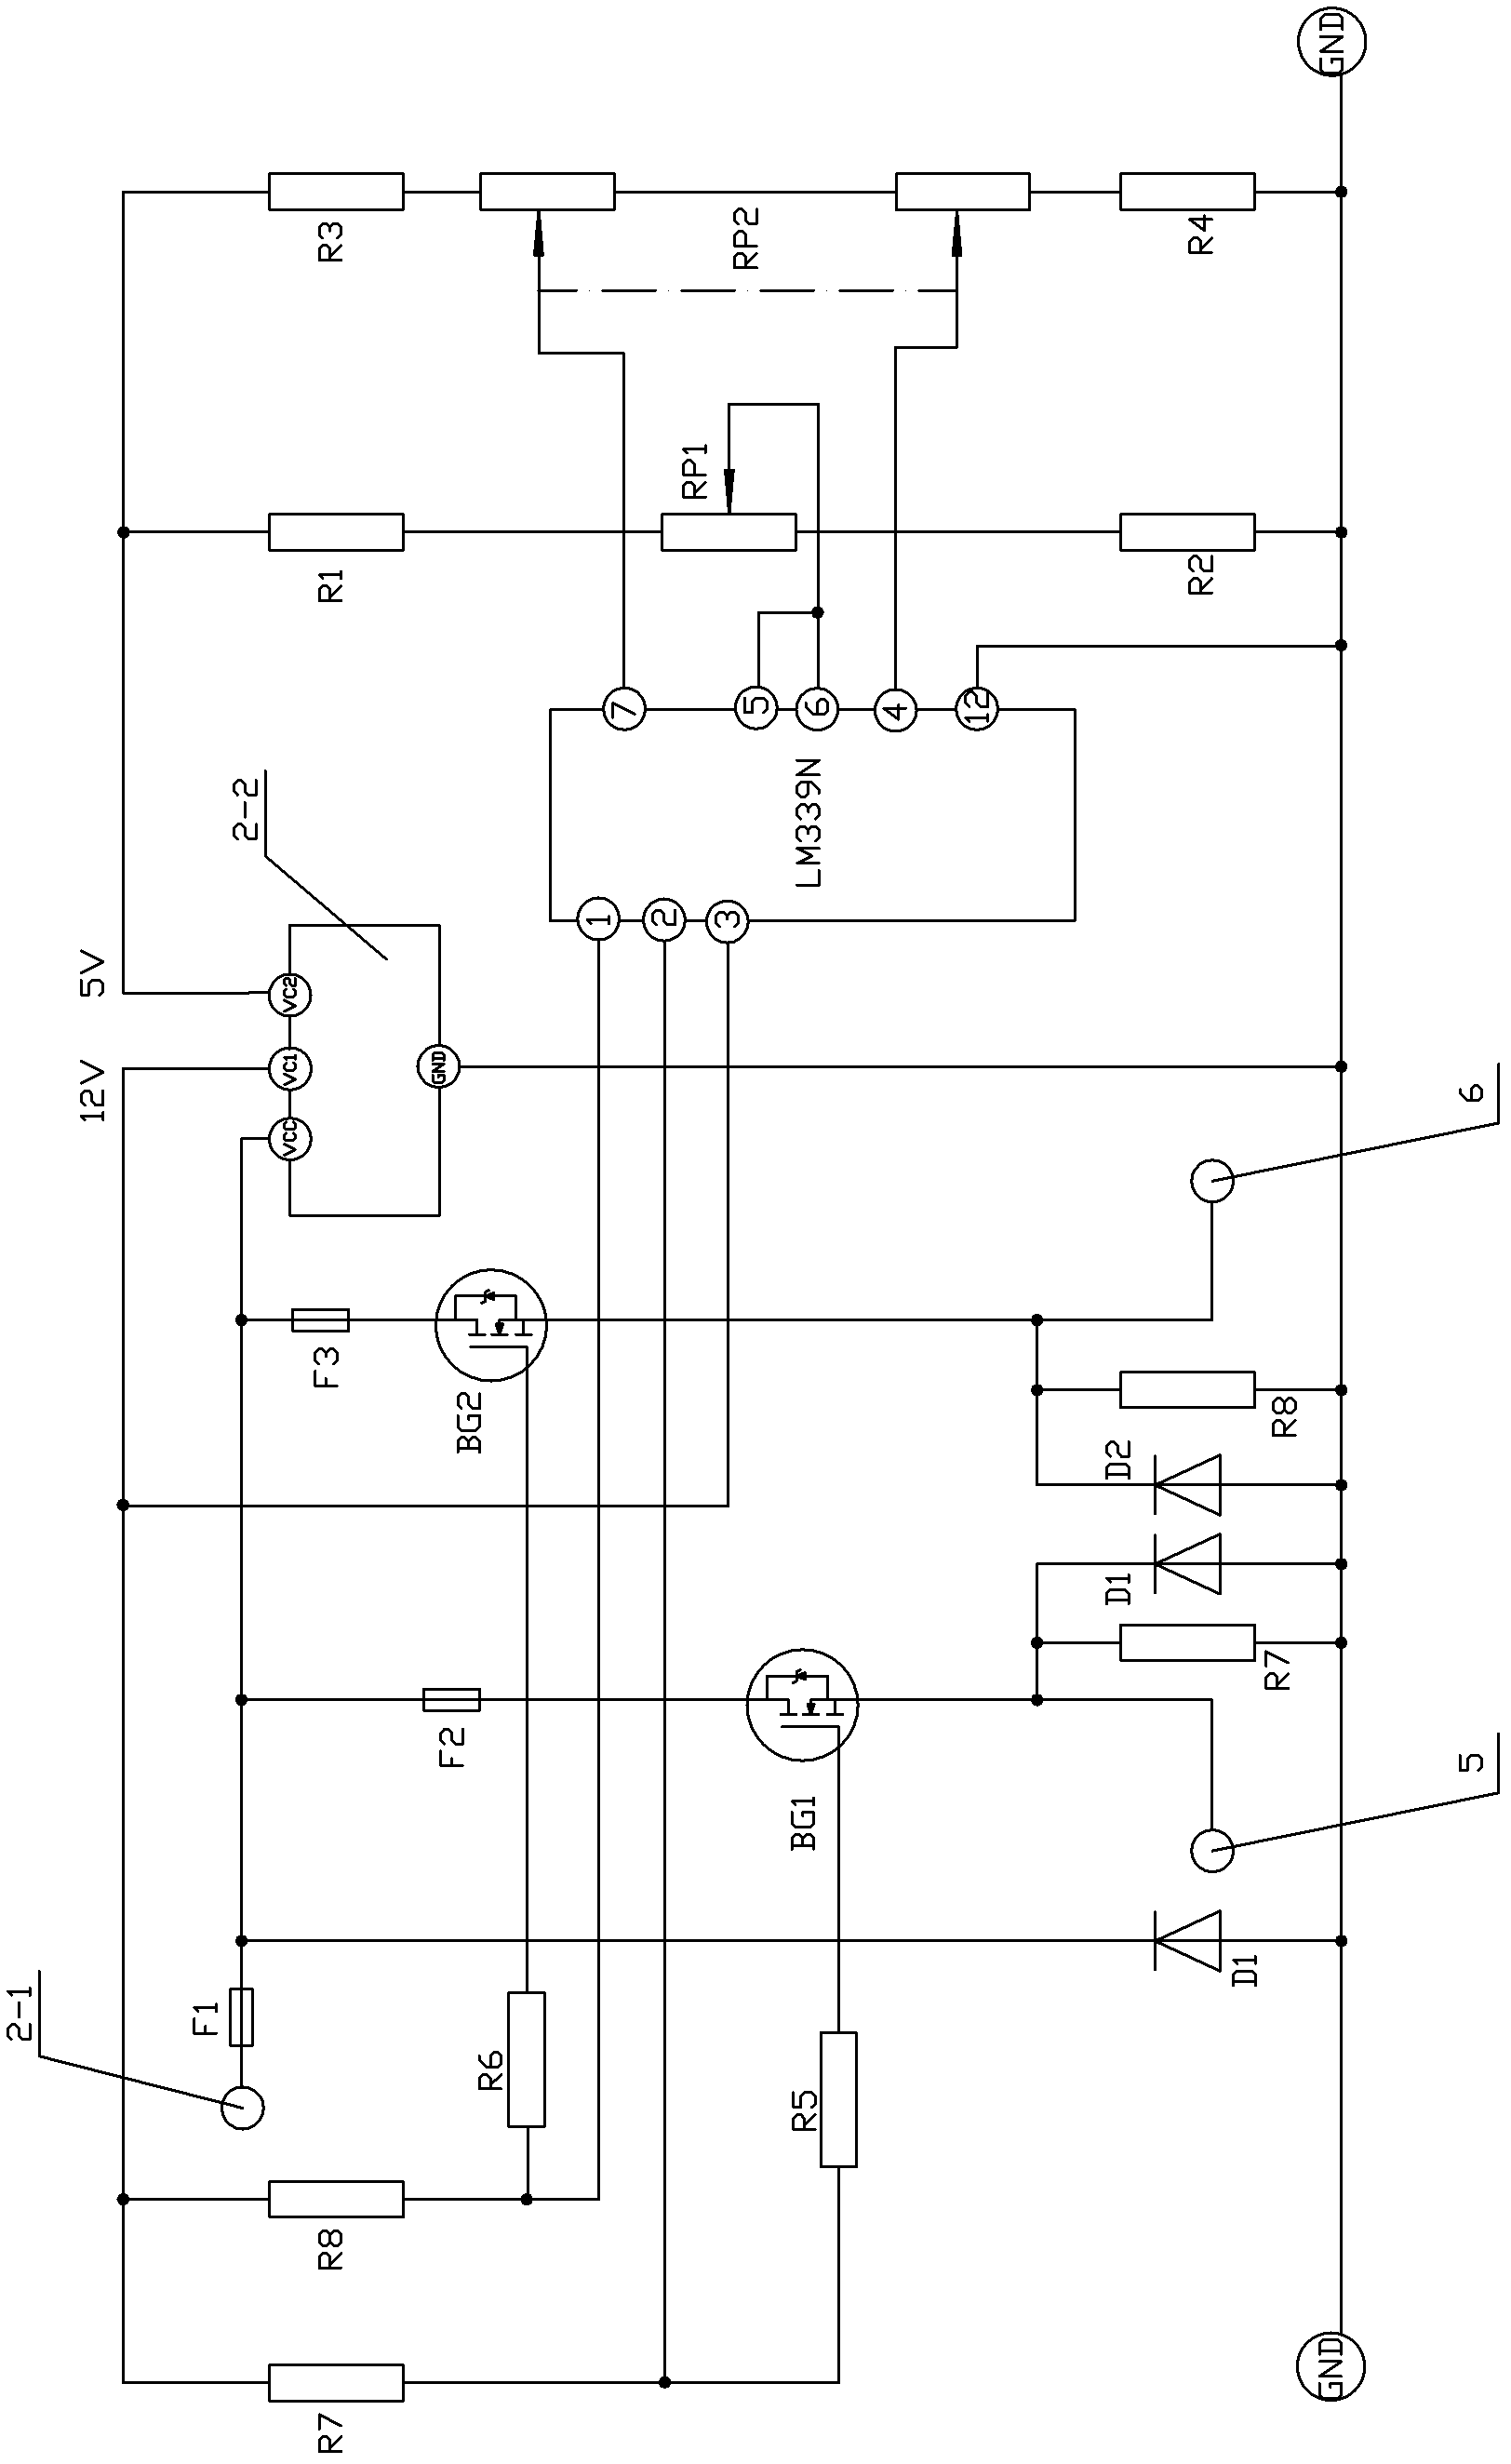 Contact-type leveling device based on comparator